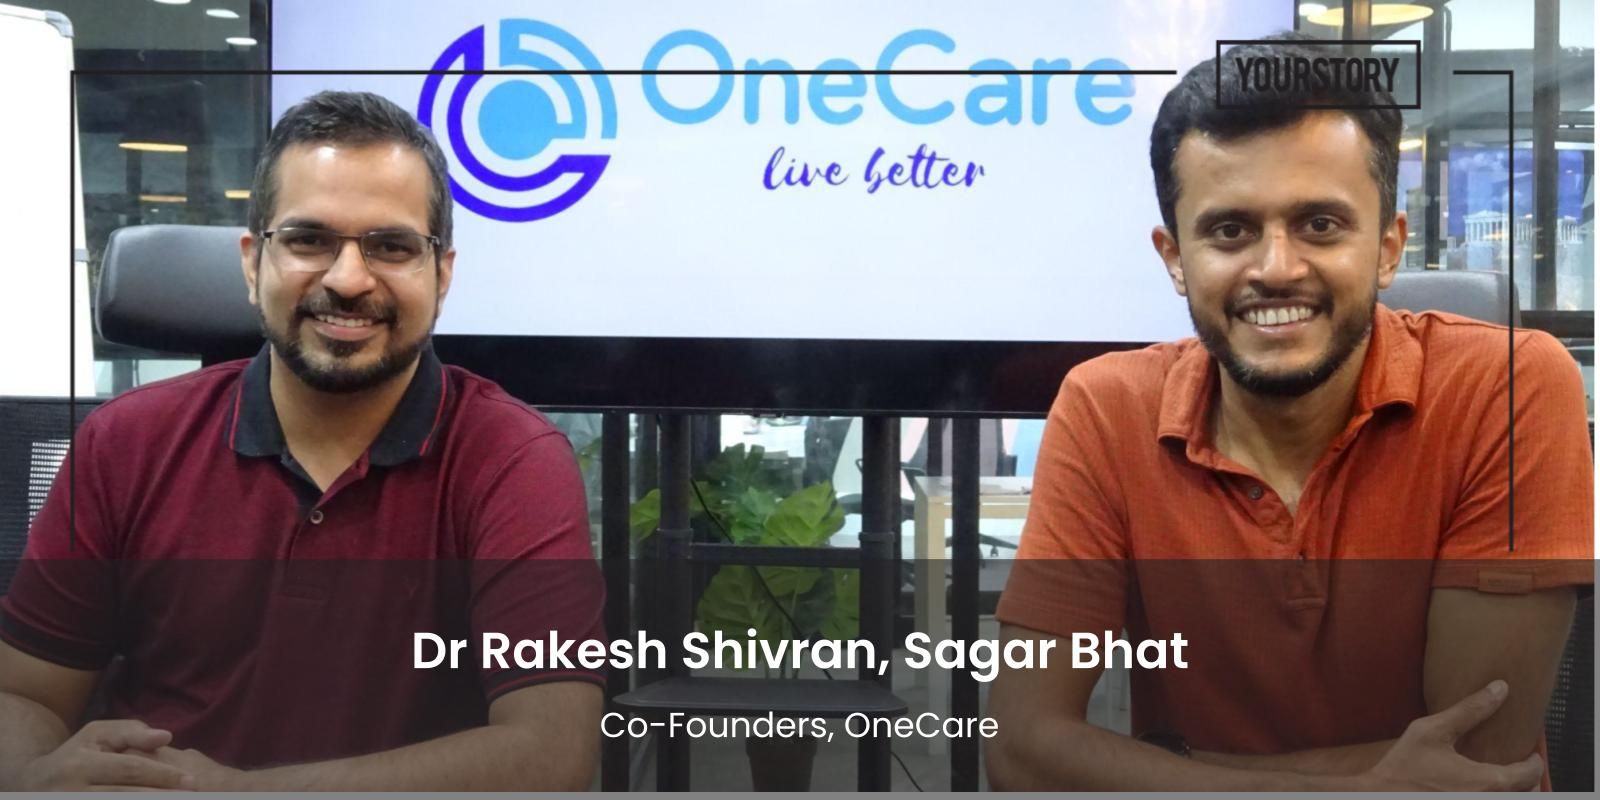 [Funding alert] Chronic care startup OneCare raises $1M in pre-seed round led by Multiply Ventures and Better Capital